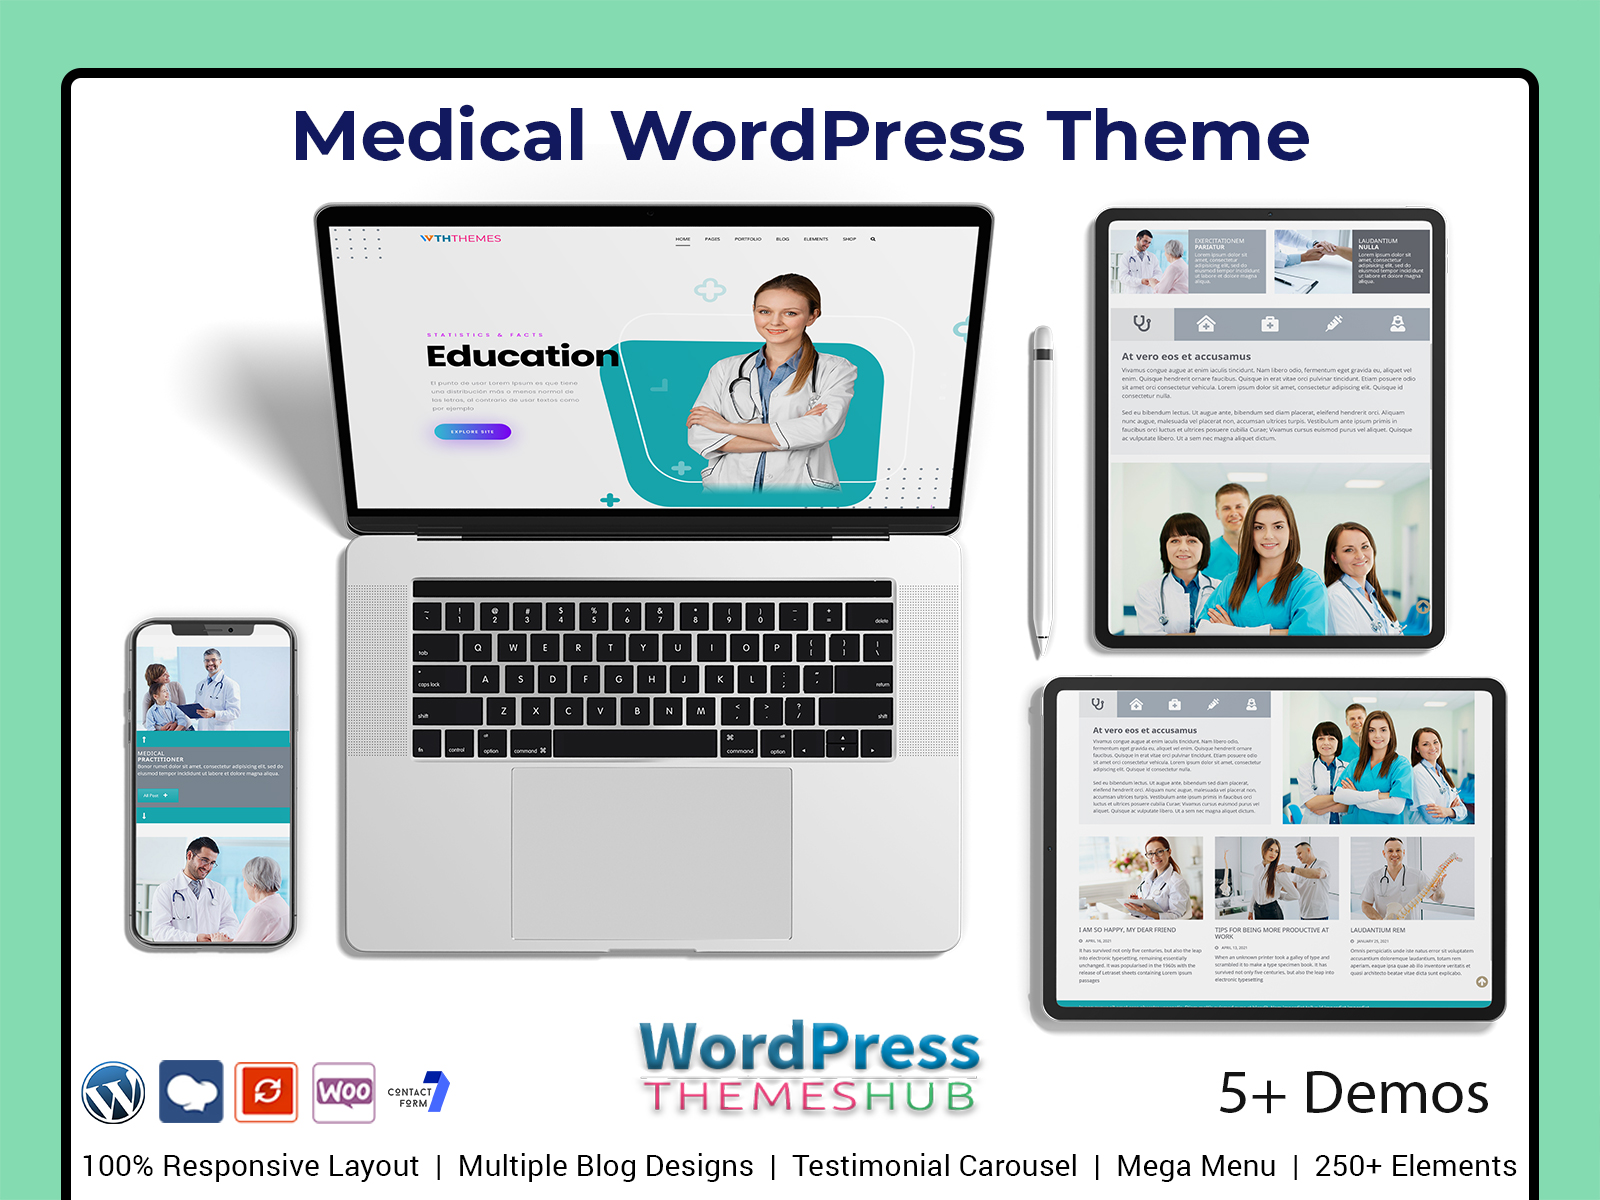  Medical WordPress Theme For All Medical And Health-Related Websites